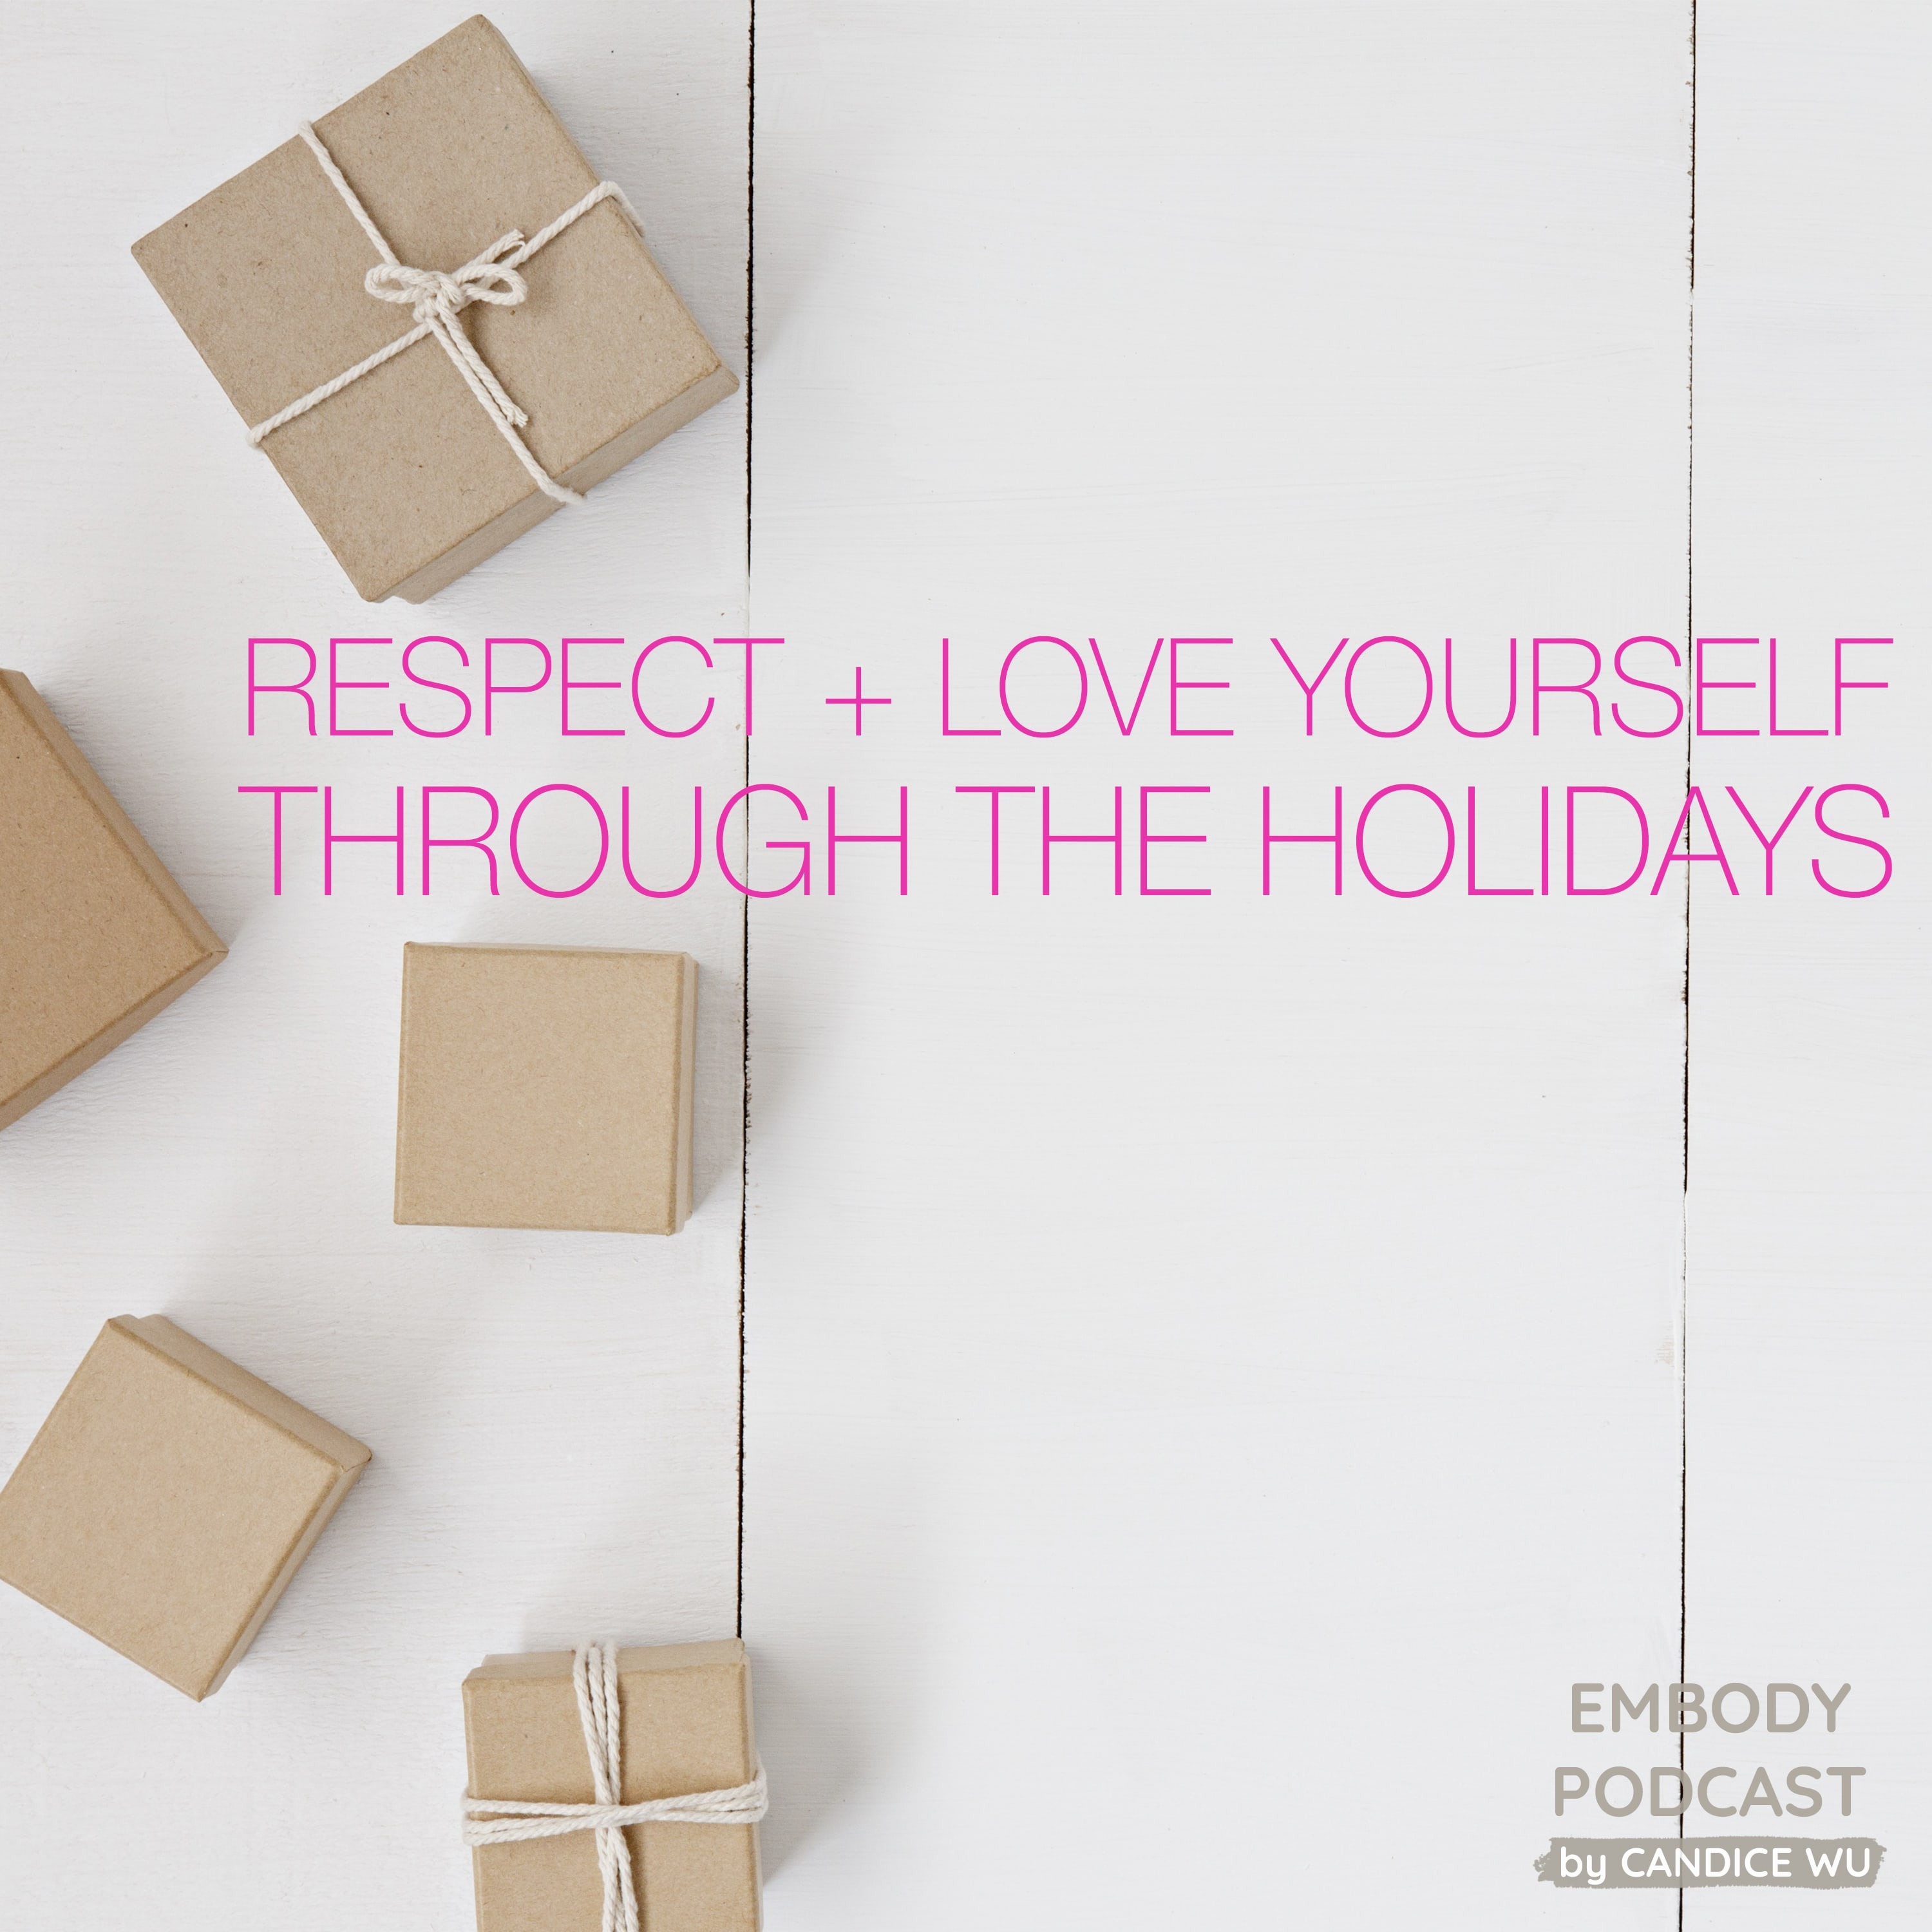 50: Respect + Love Yourself Through the Holidays